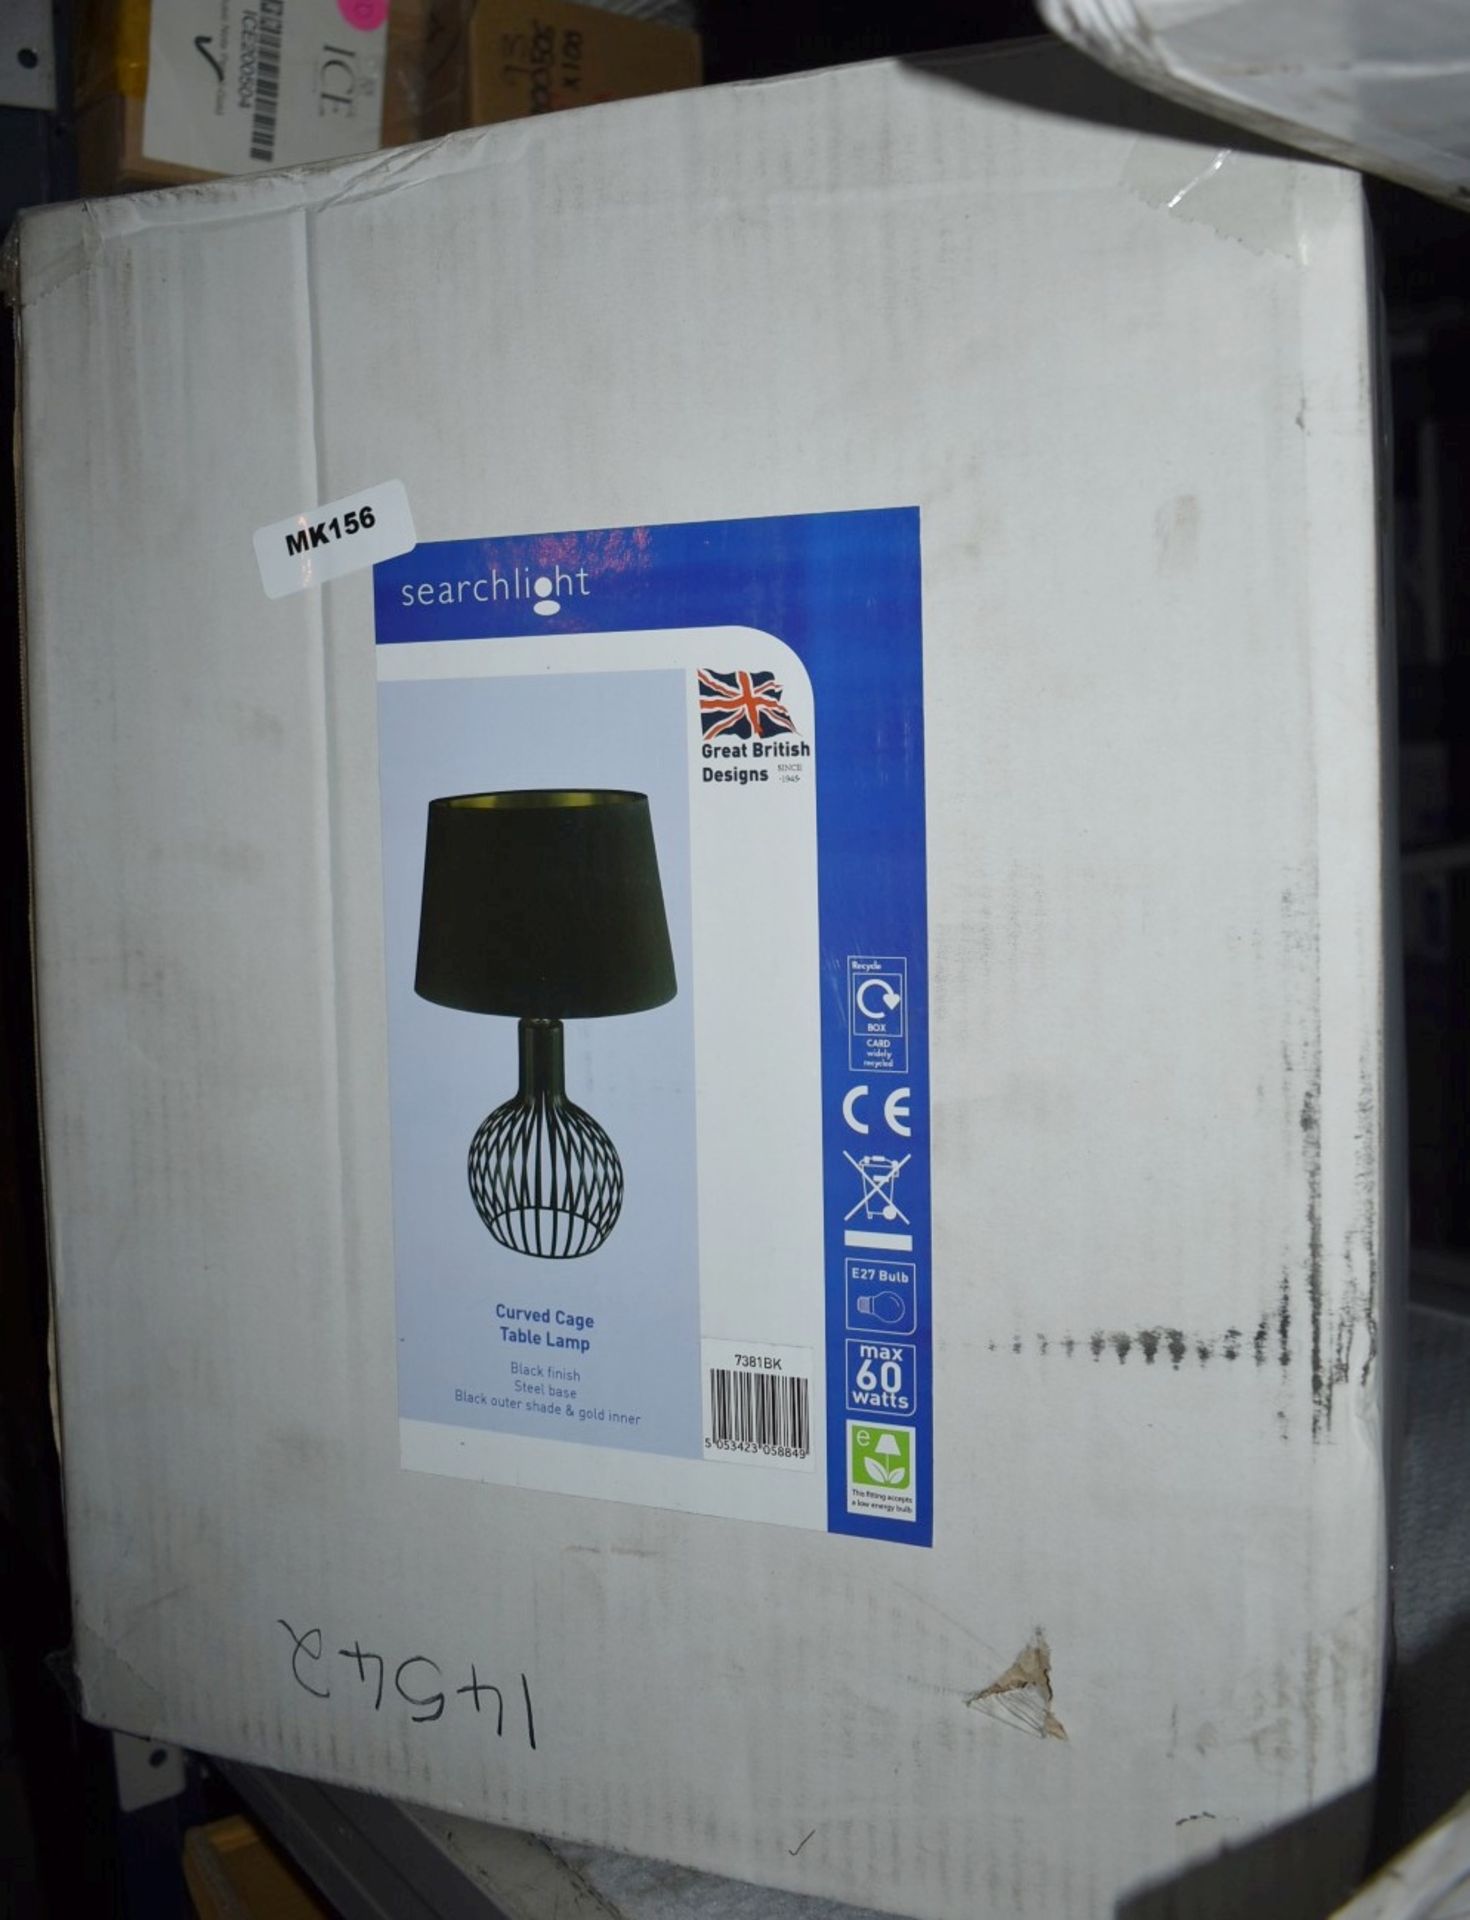 1 x Searchlight Curved Cage Table Lamp With Black Steel Base and Black Shade - Type 7381BK - Ref - Image 2 of 2